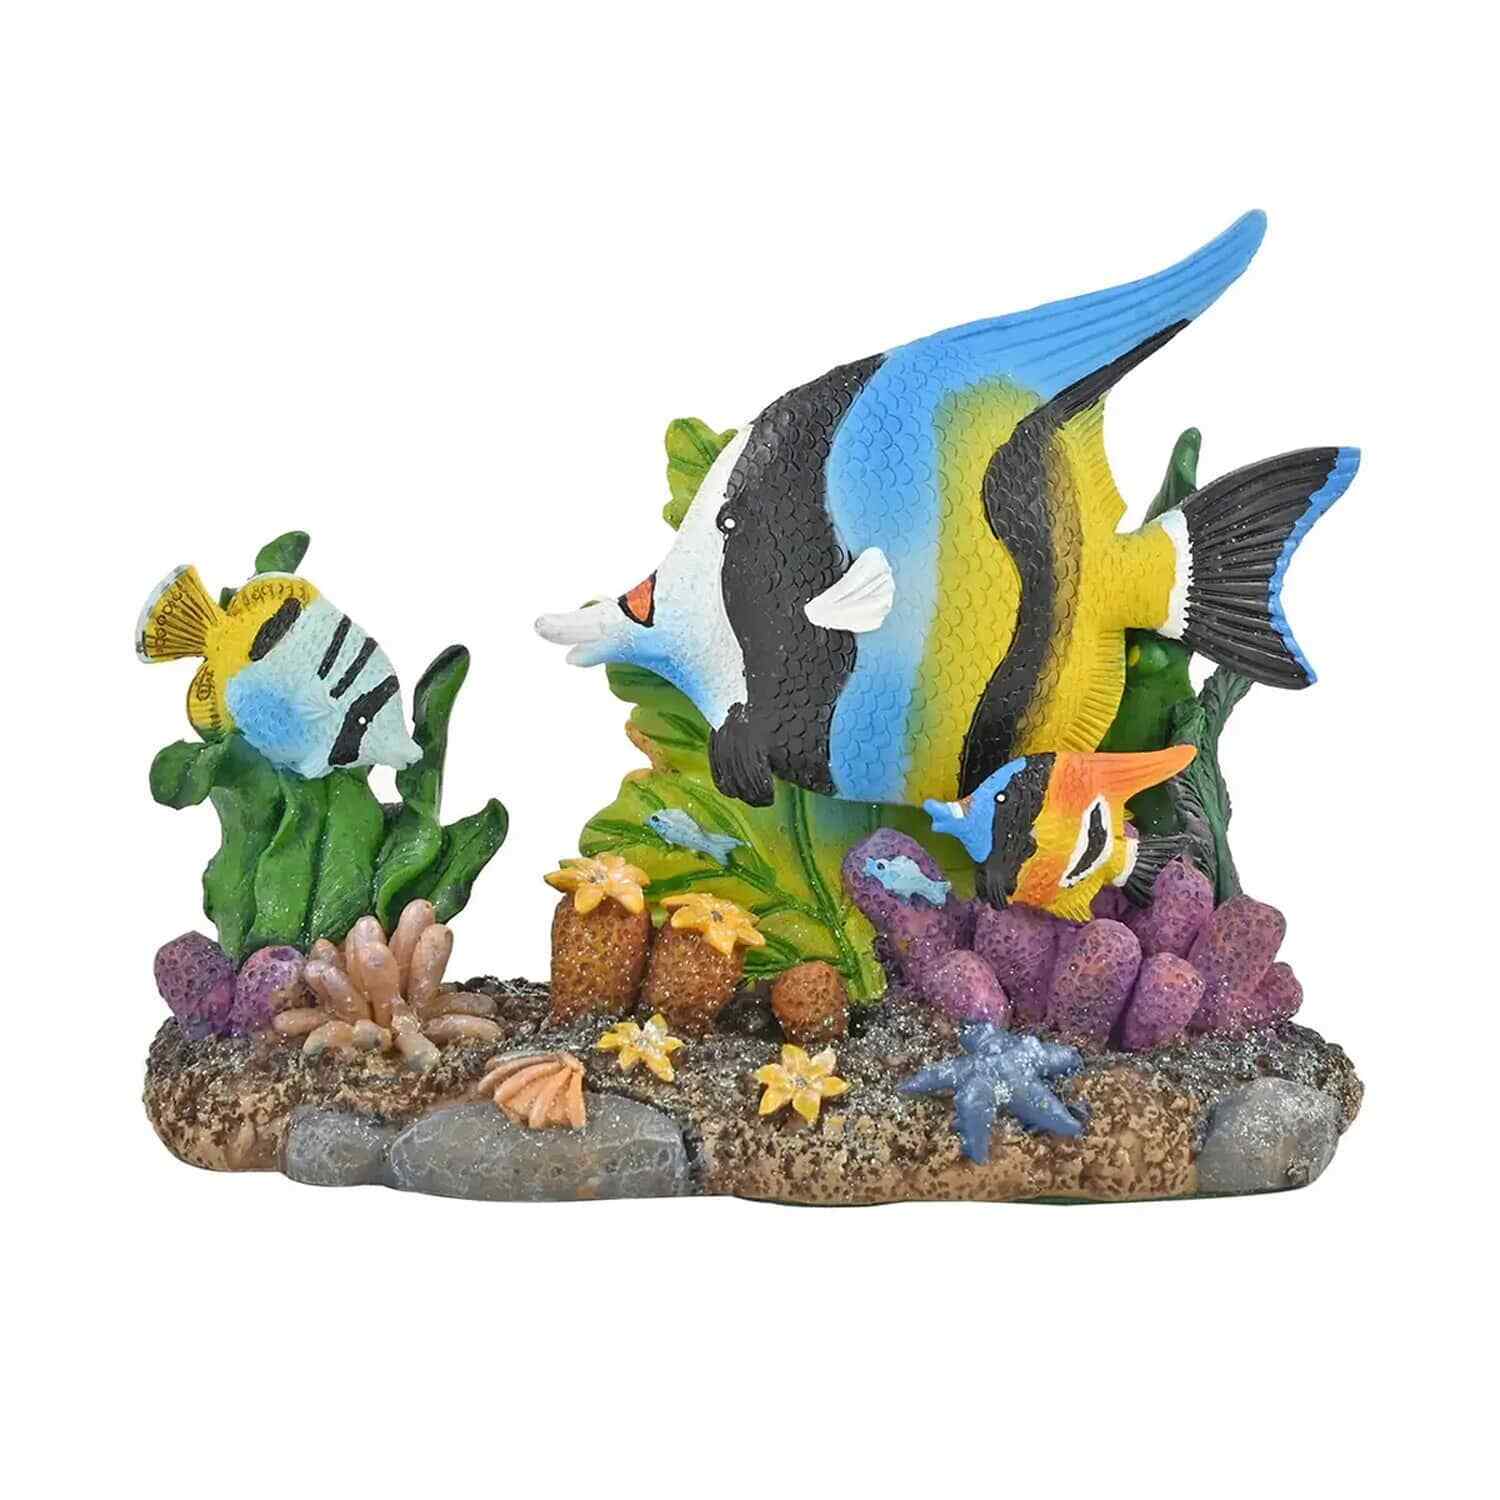 Handpainted Multi Color Resin Figurine Tropical Fish Pattern Home Decoration